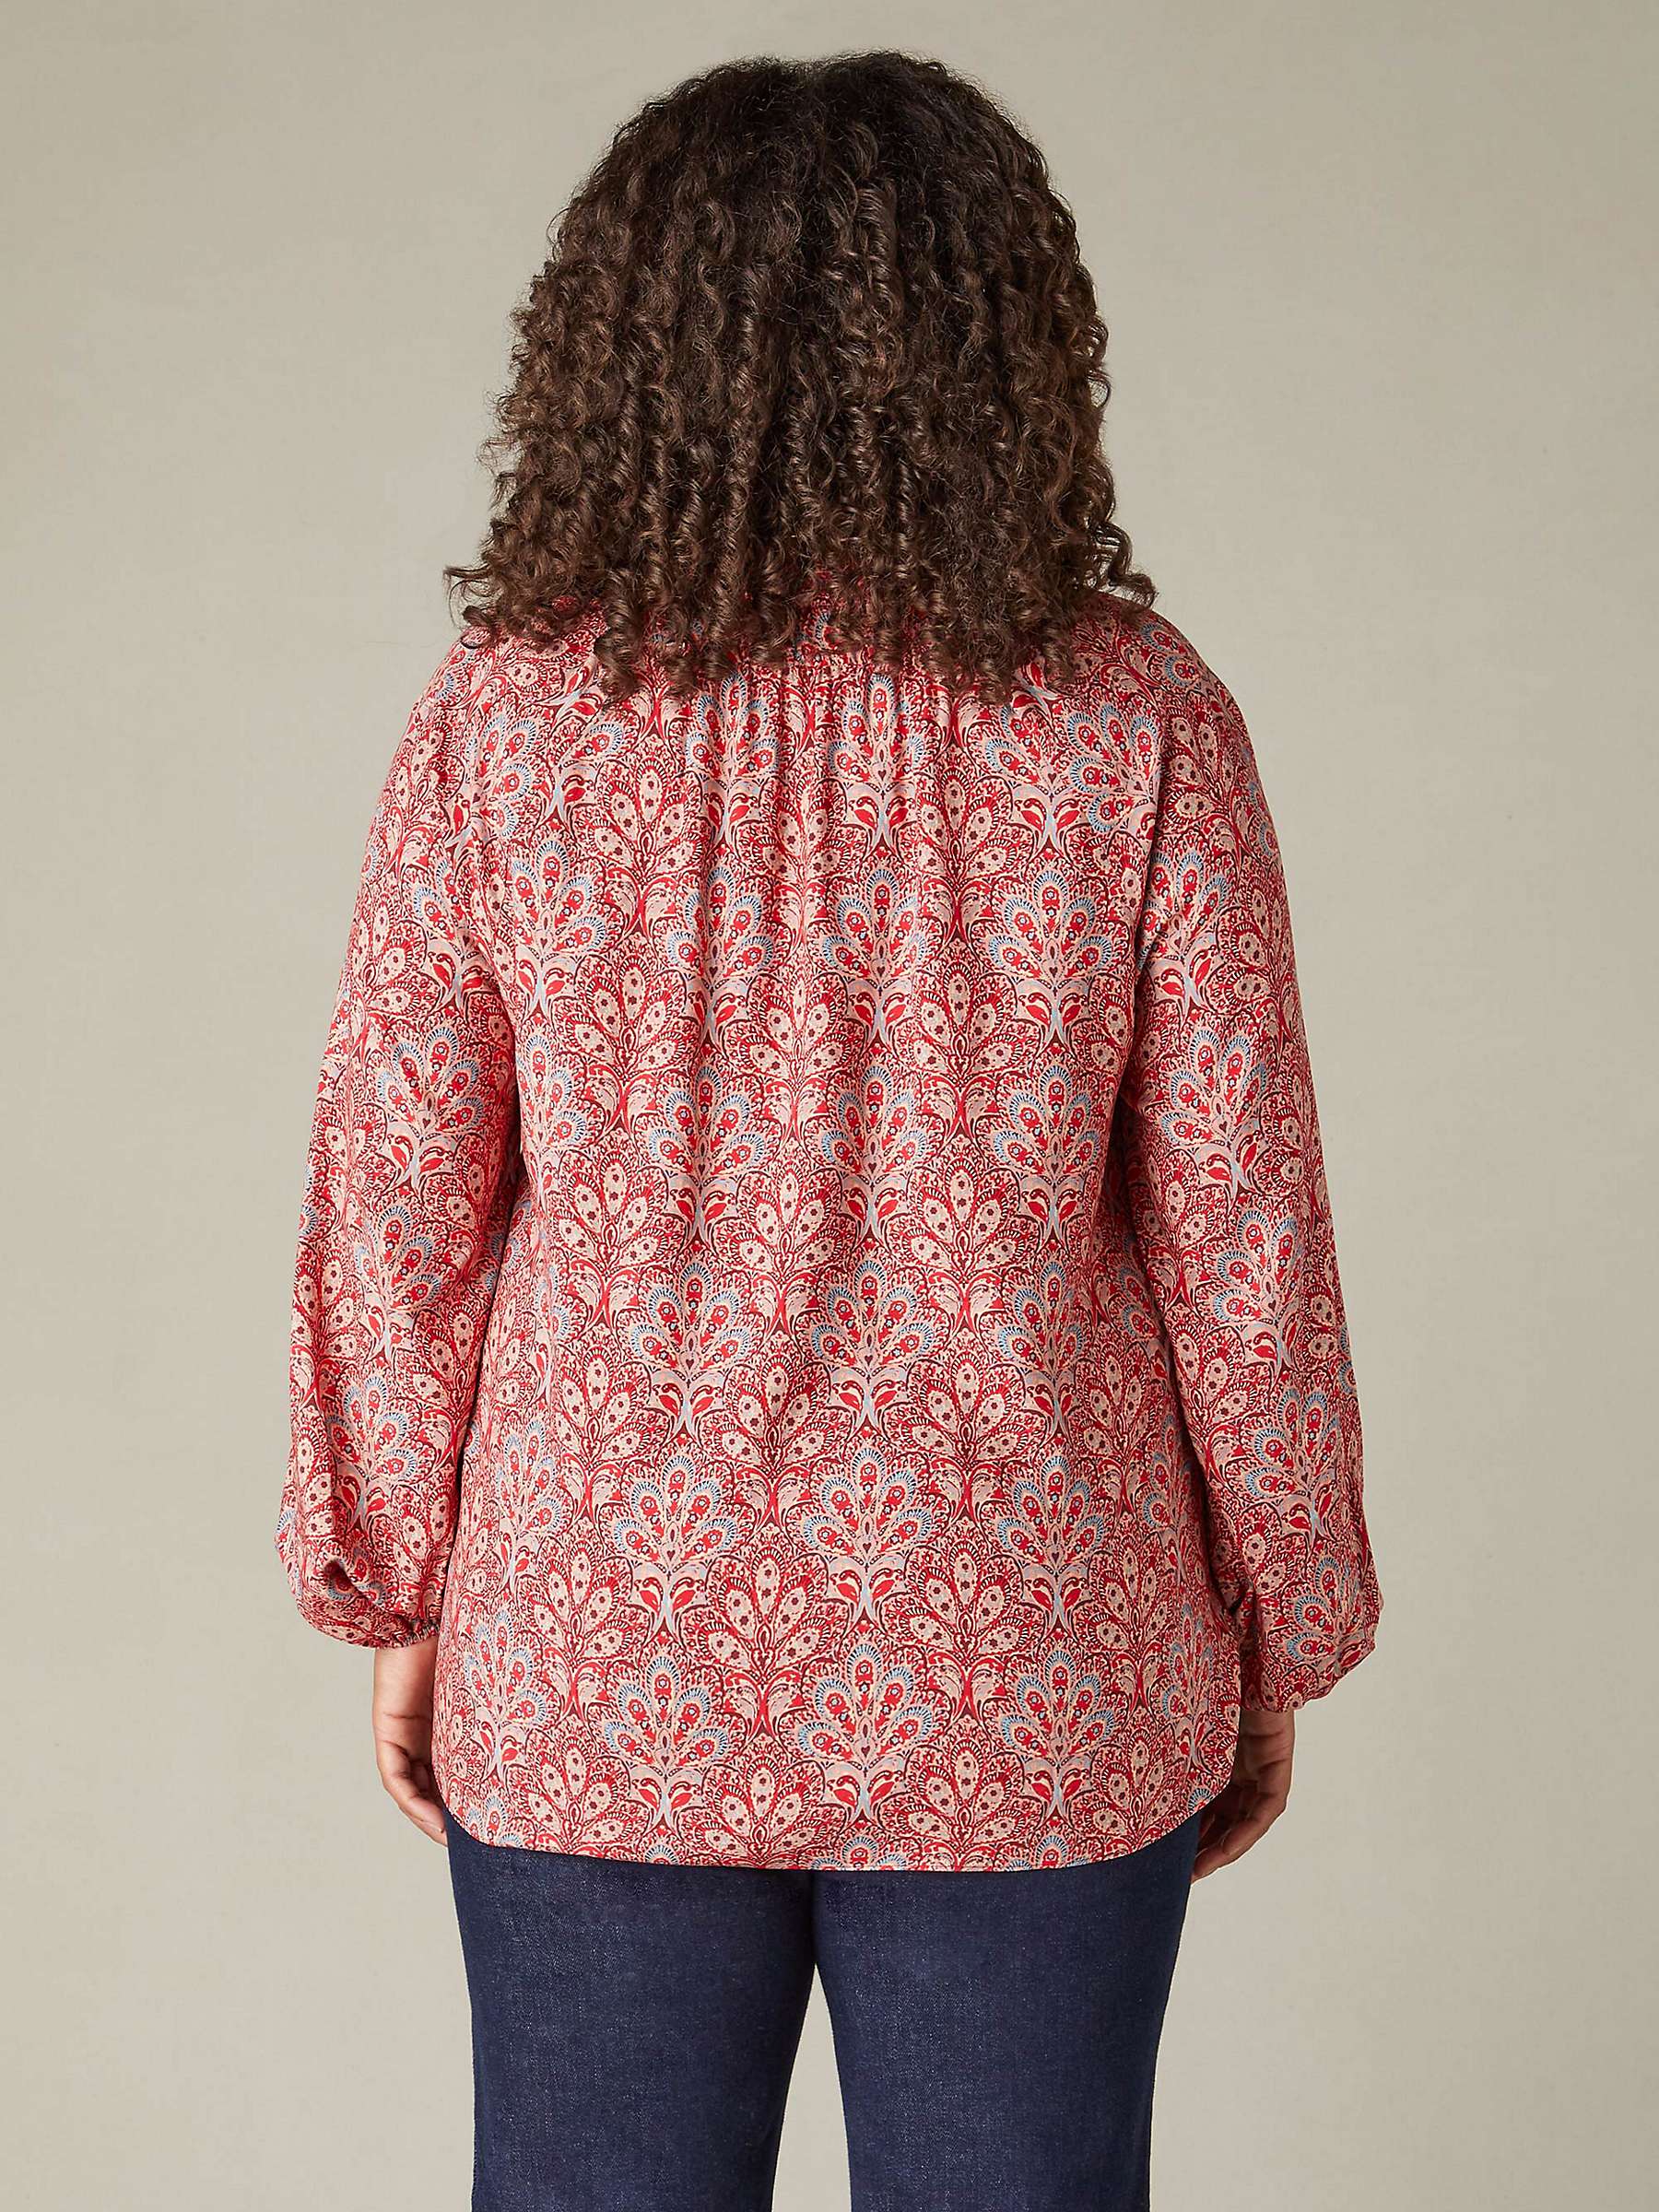 Buy Live Unlimited Curve Paisley Print Blouse, Red/Paisley Online at johnlewis.com